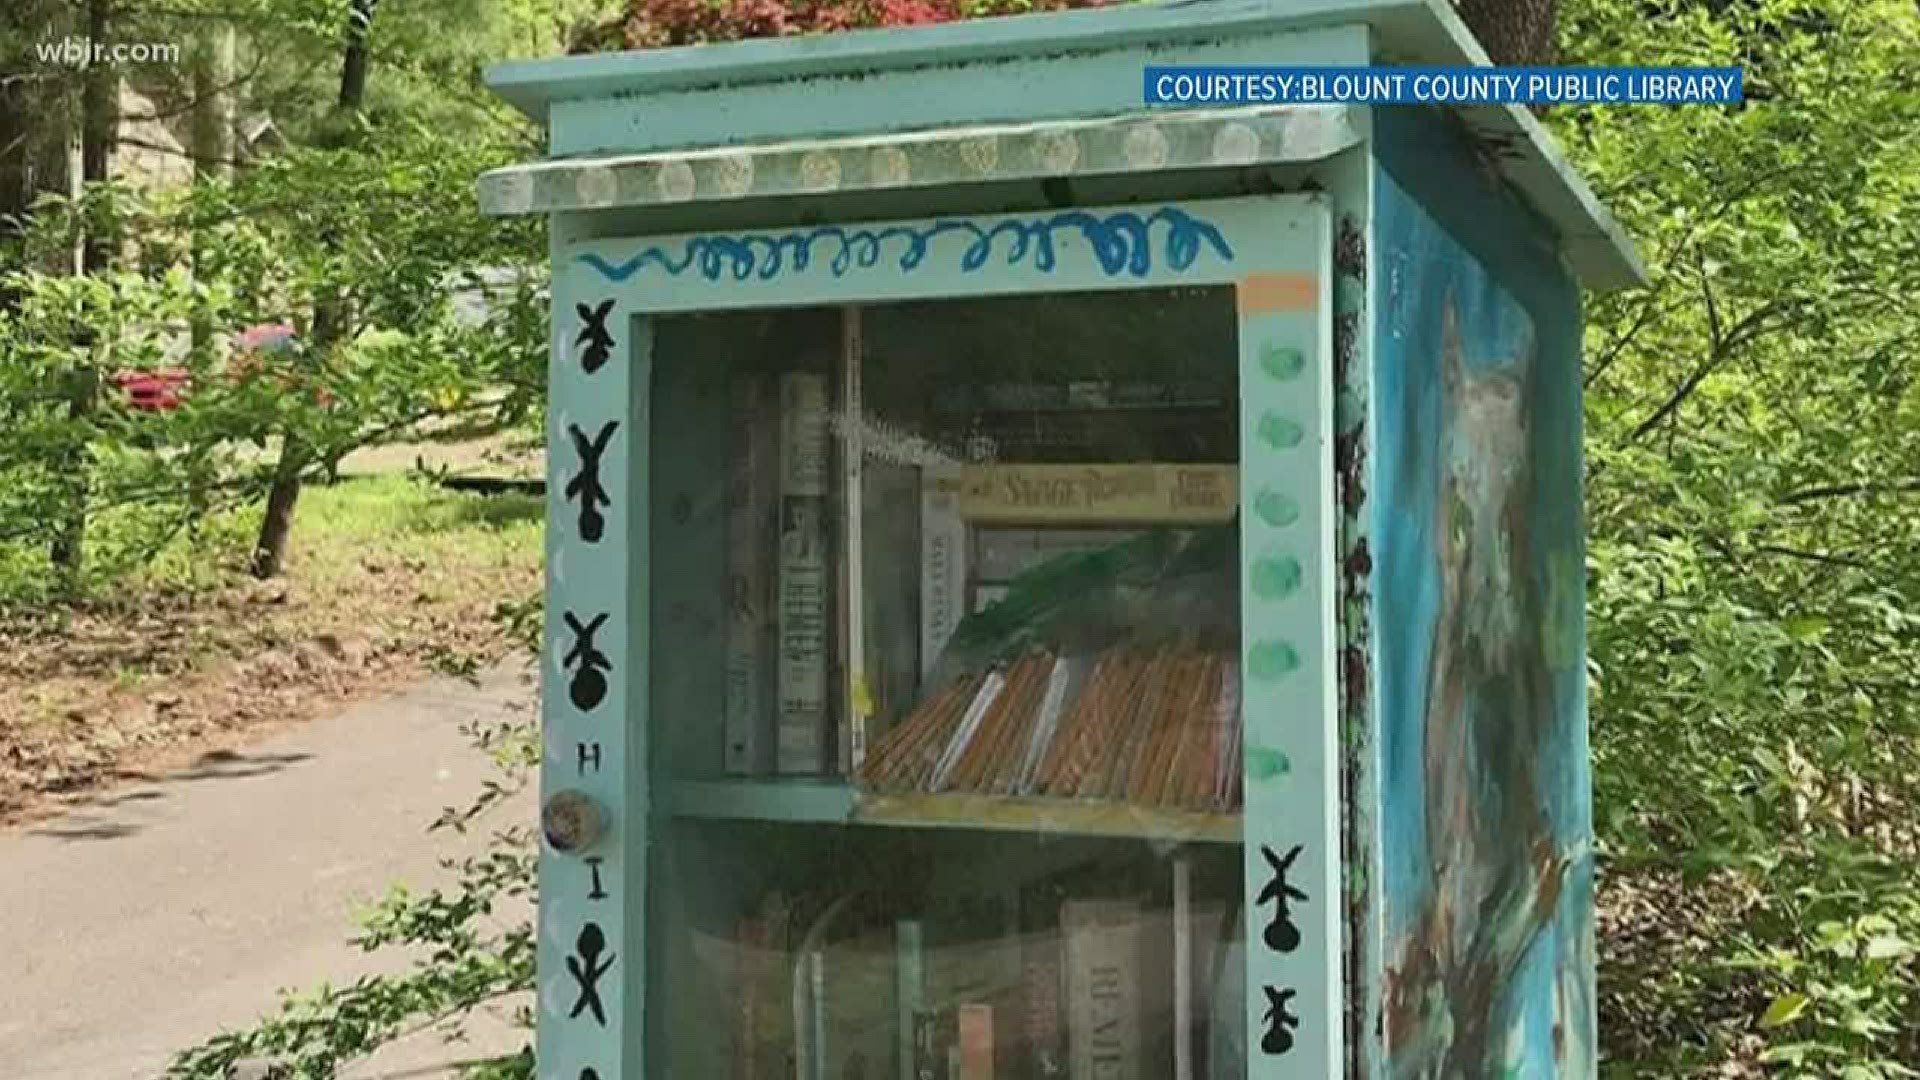 The library discontinued its curbside library service, but put some seeds from its seed library outside in its little free libraries.